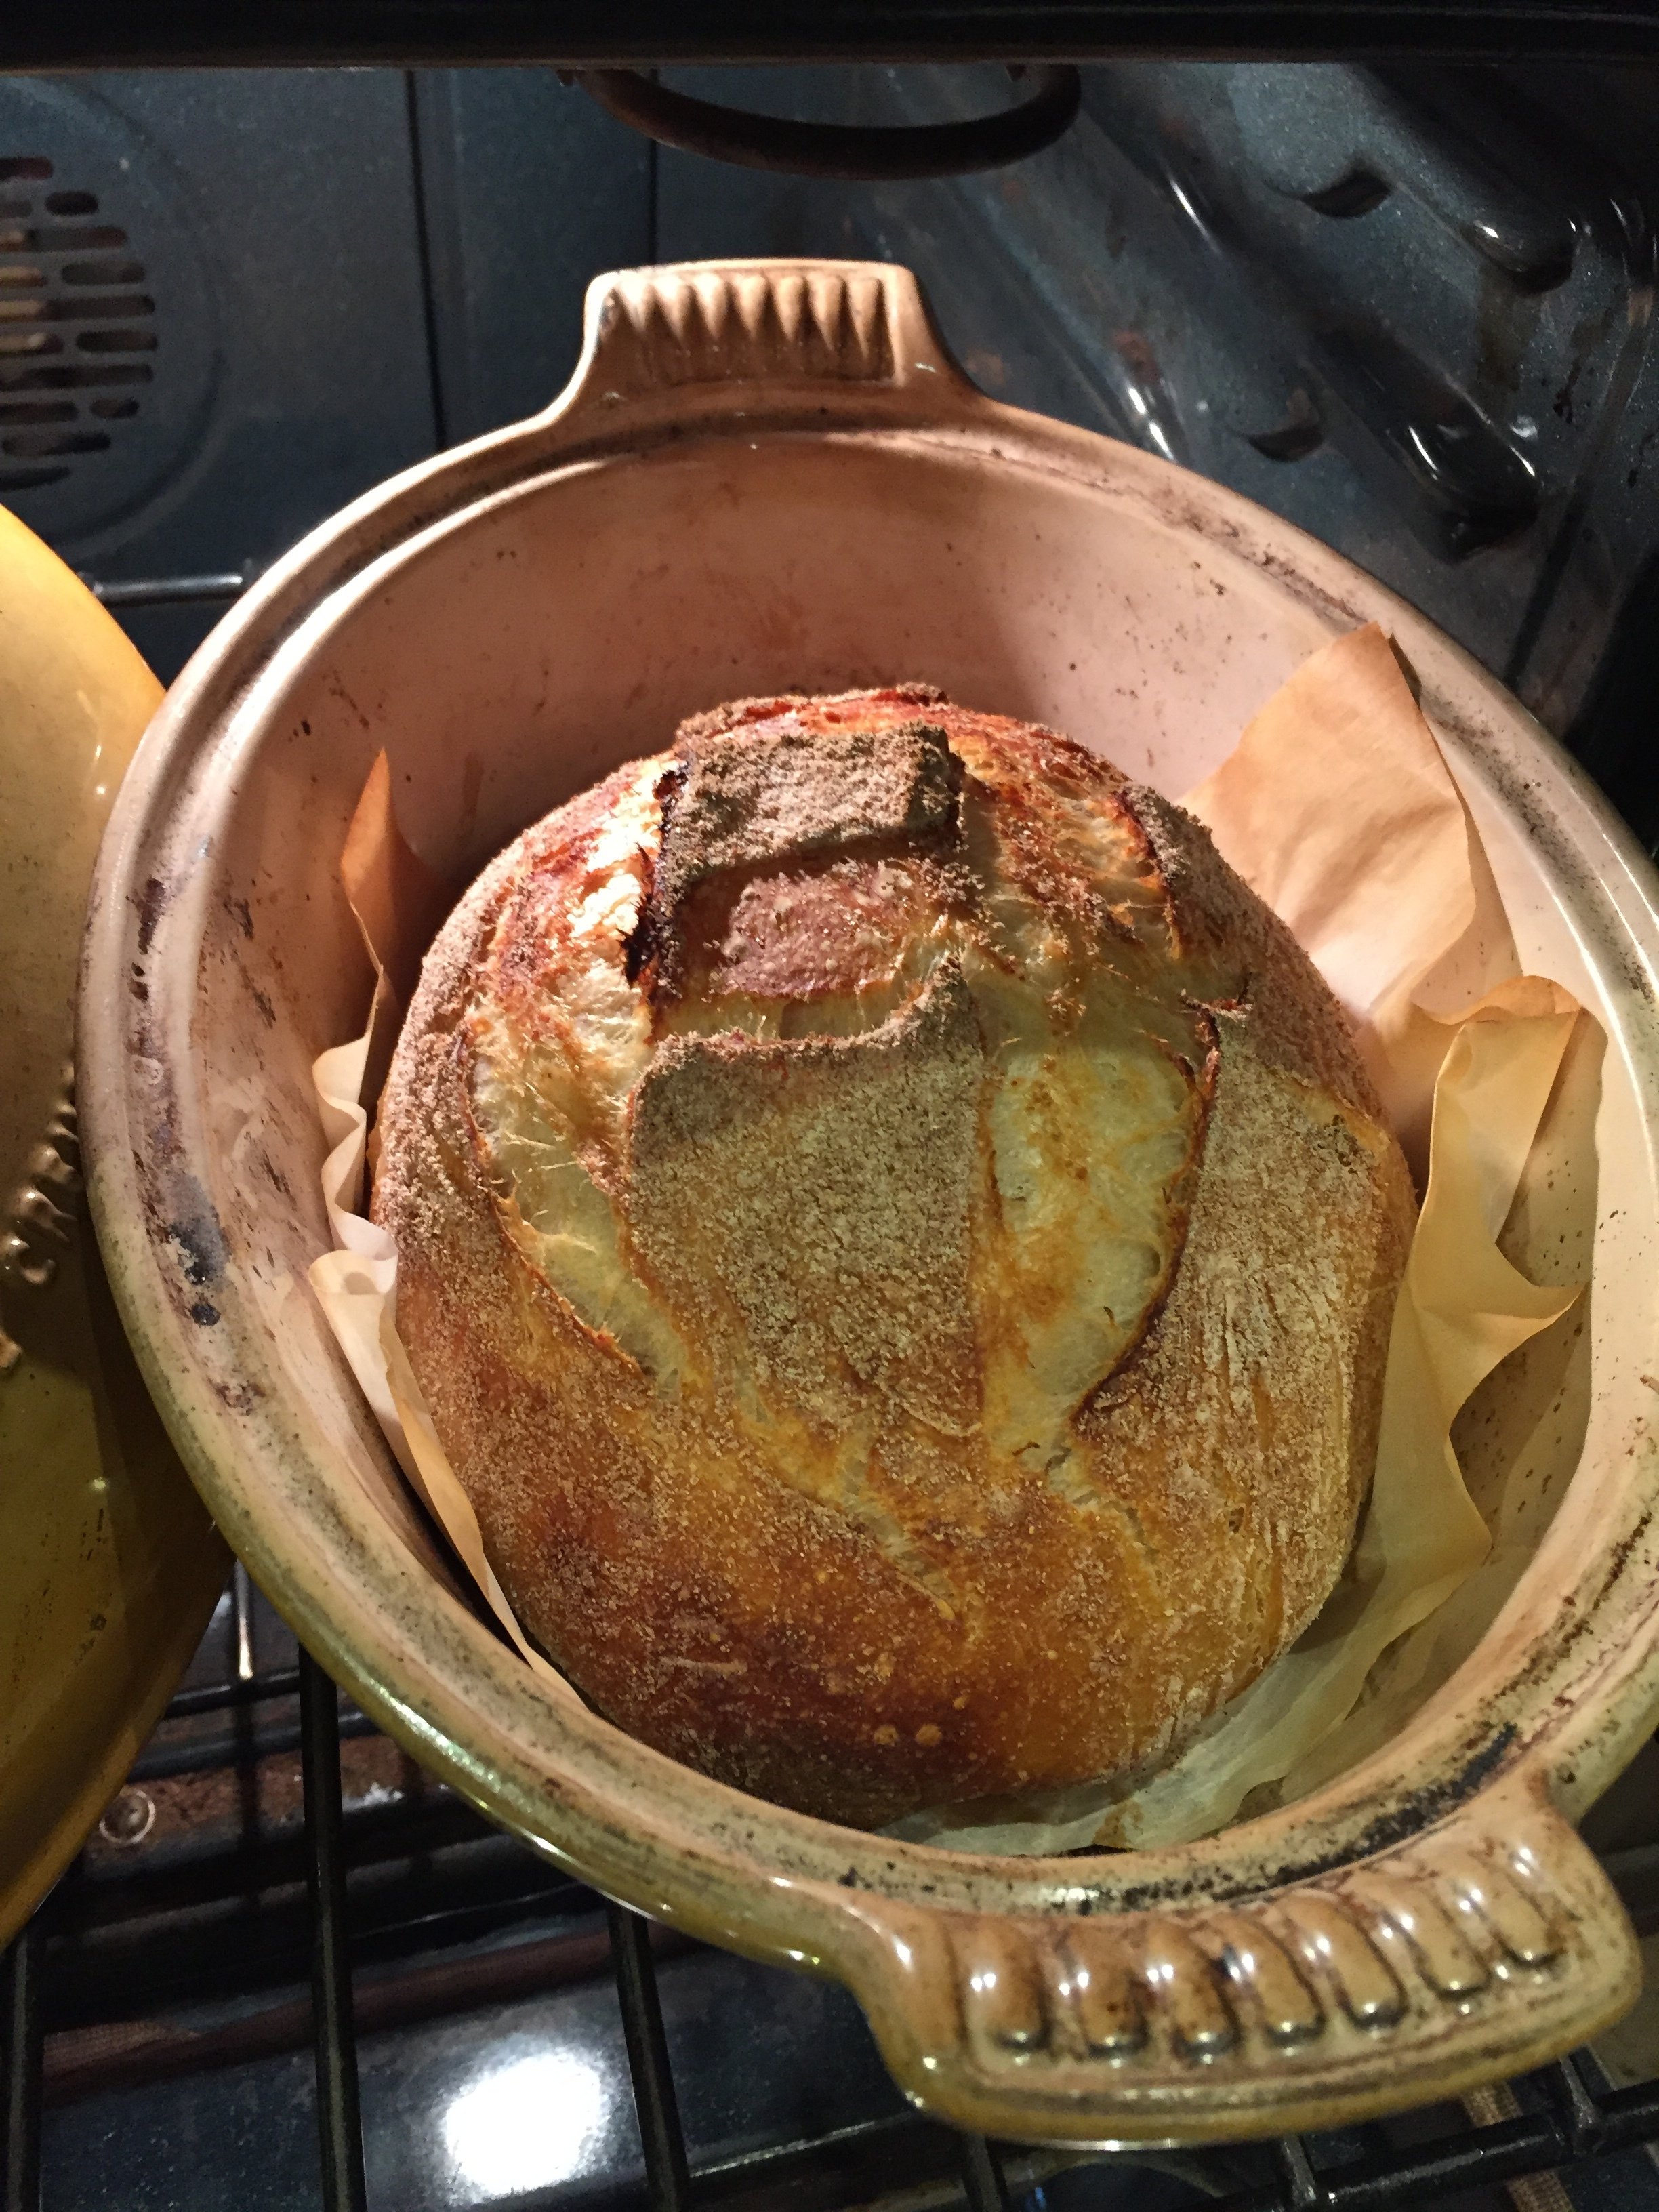 What size dutch oven for baking bread - Baking Tools - Breadtopia Forum